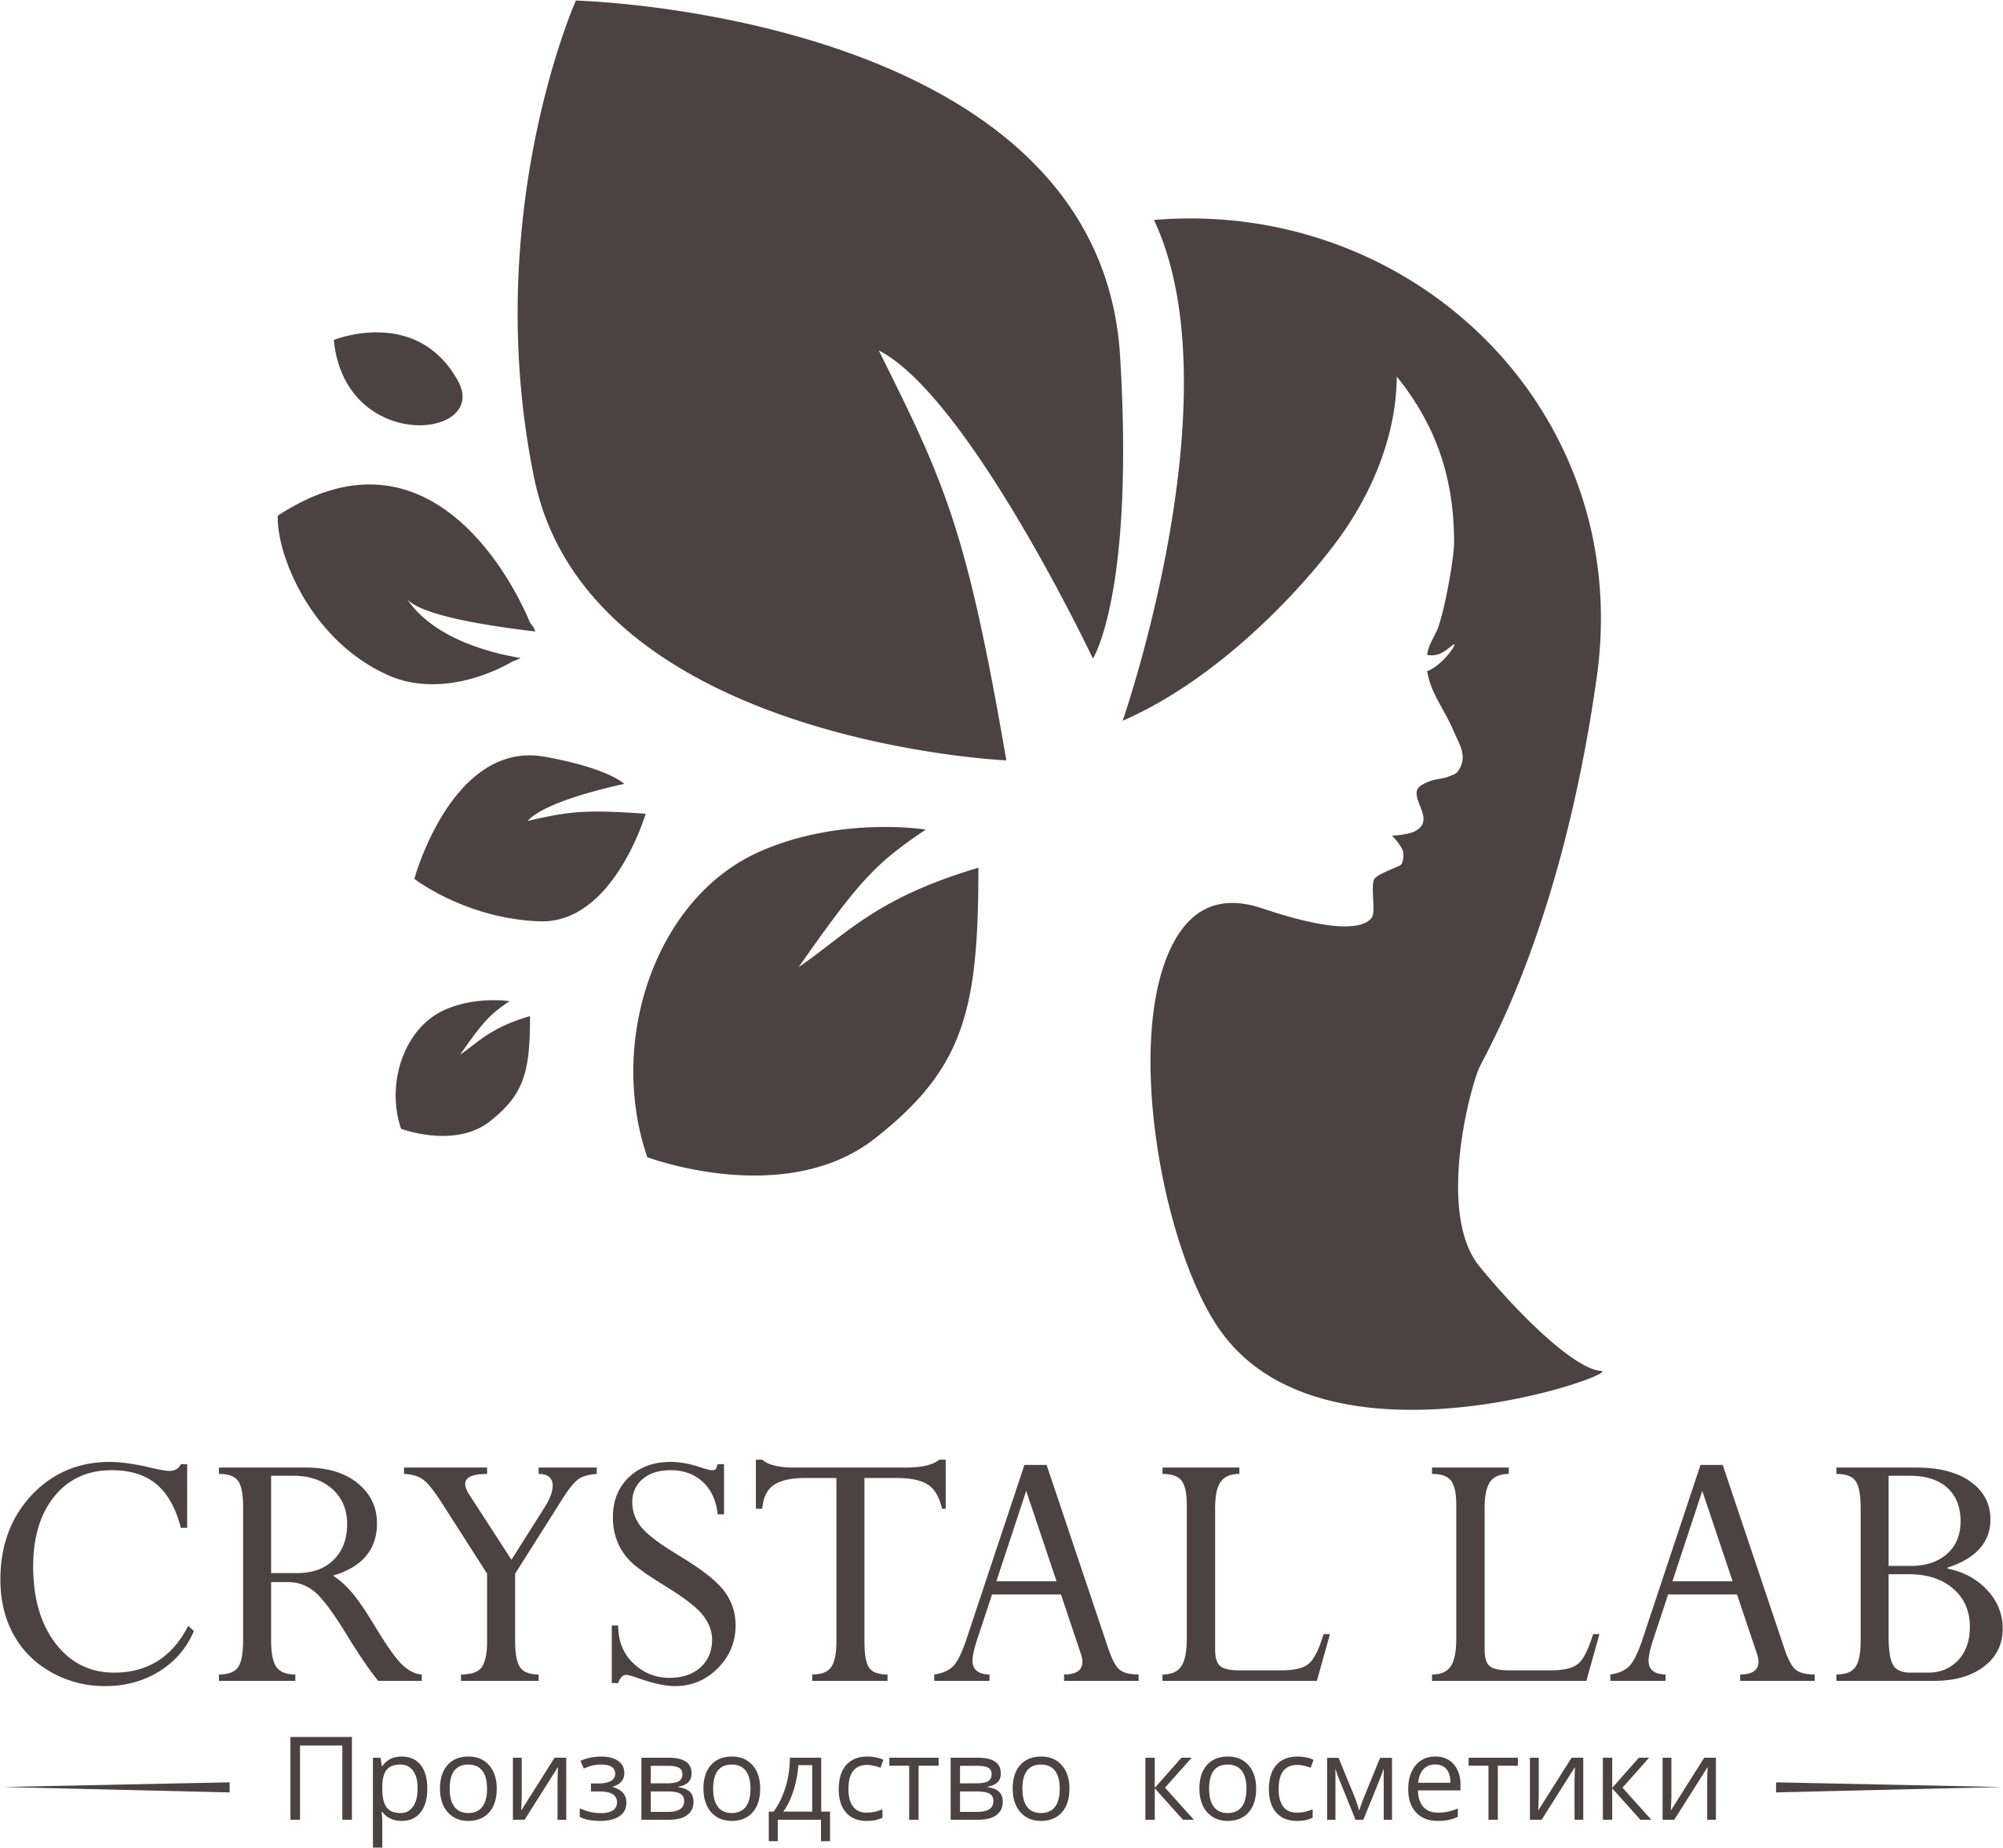 Crystal some